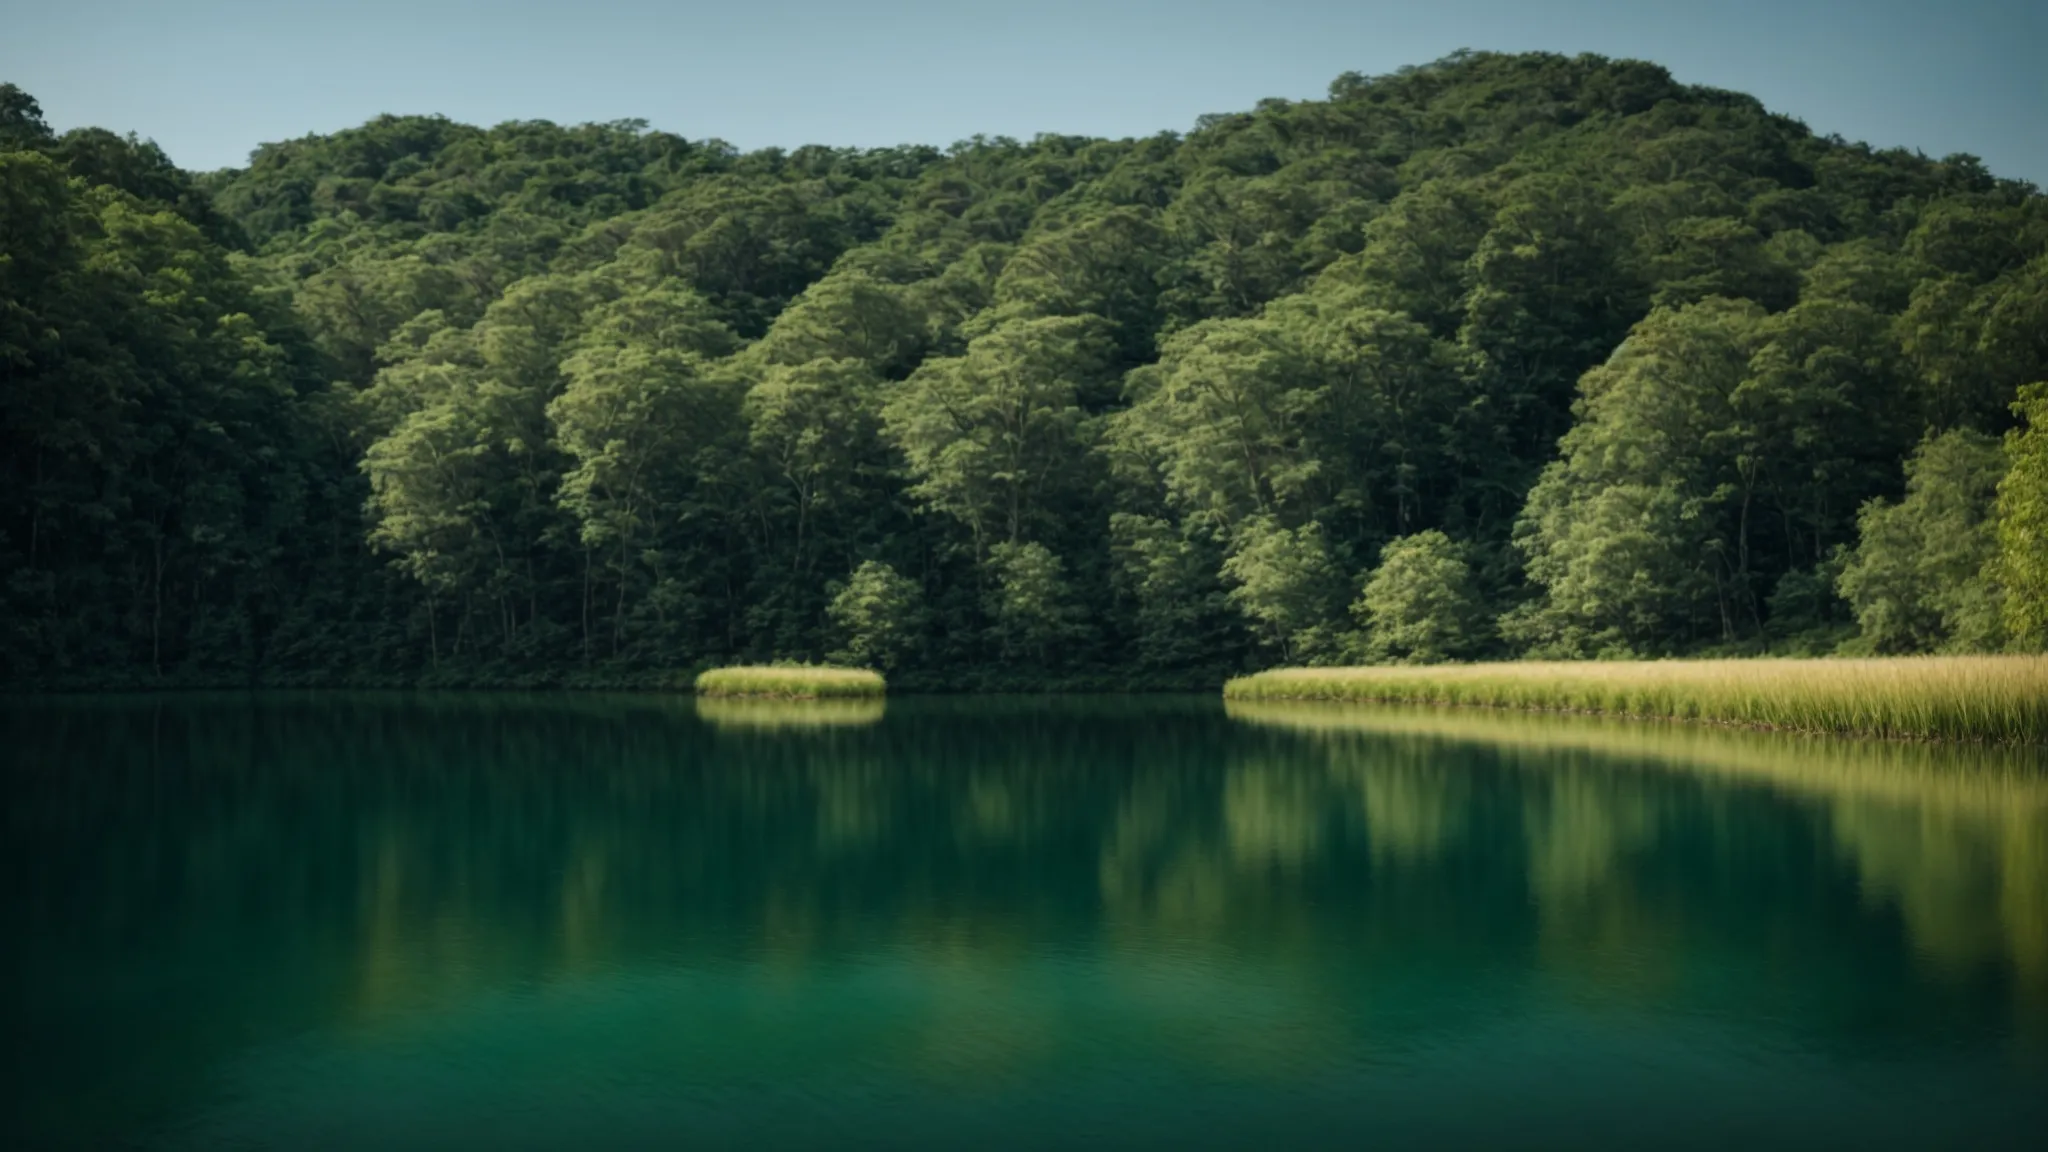 a serene lake surrounded by lush forests under a clear blue sky, symbolizing peace and tranquility.